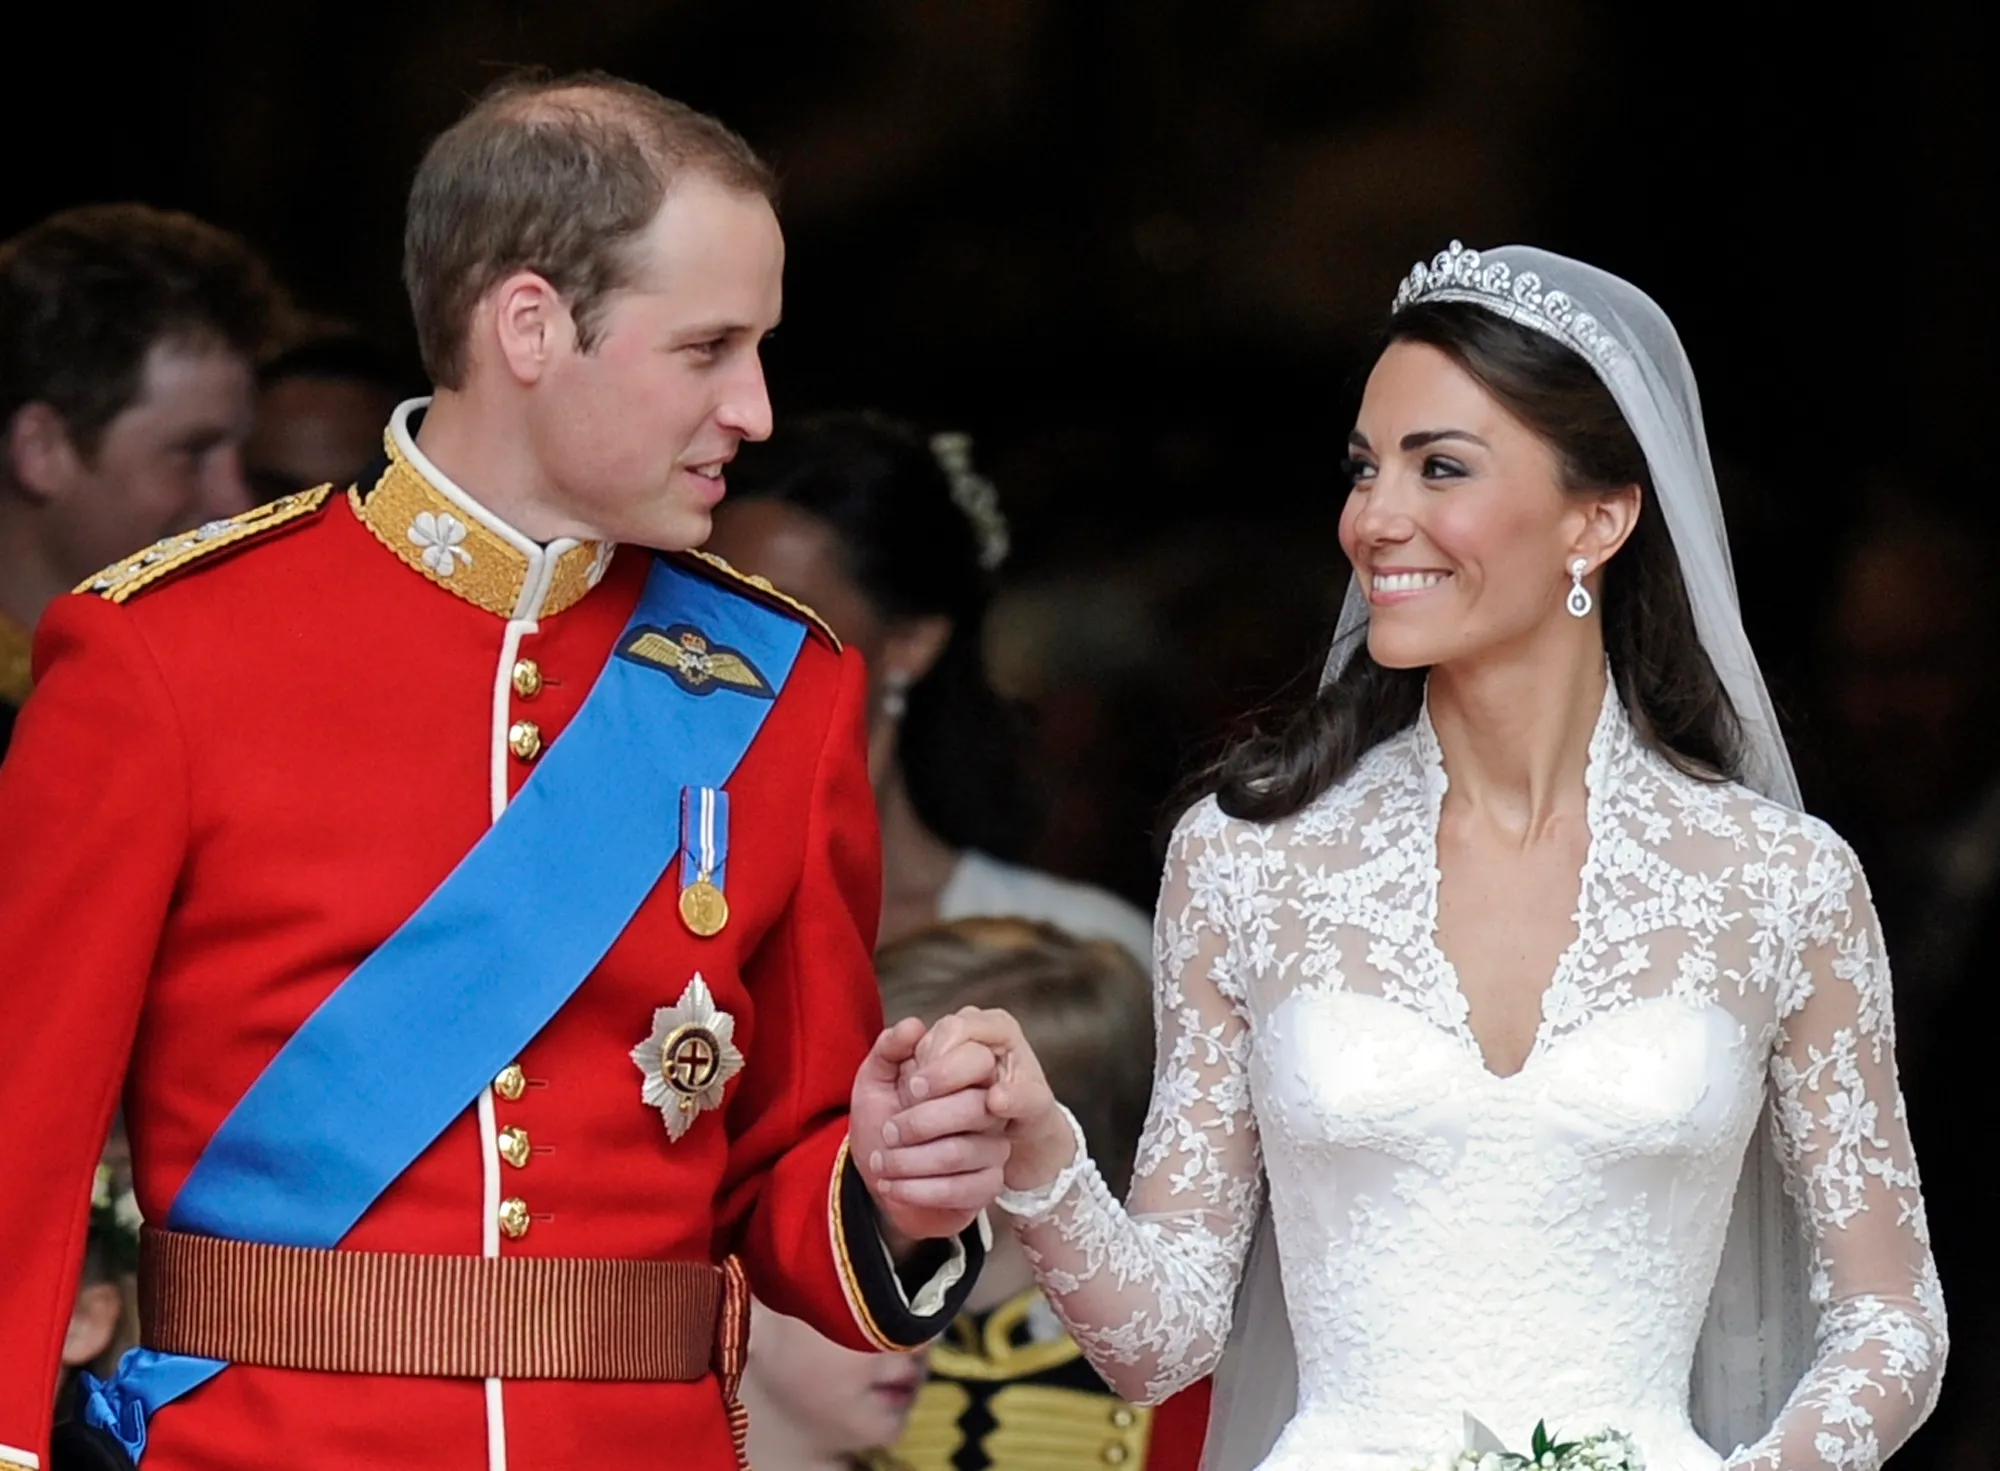 Hidden Details On Royal Wedding Dresses (Diana/Kate/Meghan) You Didn’t Know About